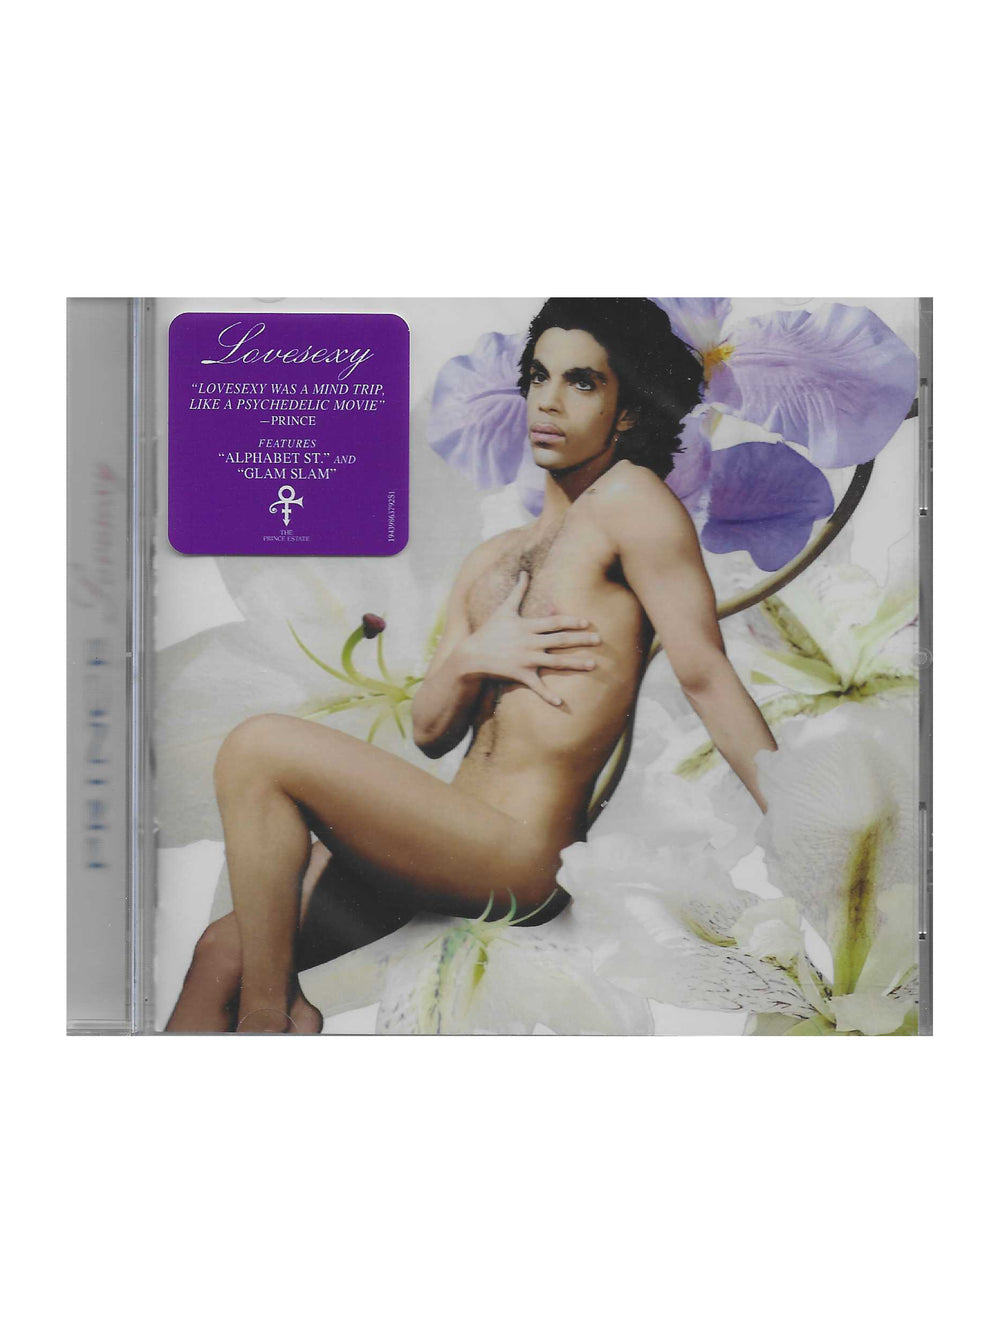 Prince – Lovesexy CD Compact Disc Reissue 2022 Sony Legacy NPG Records